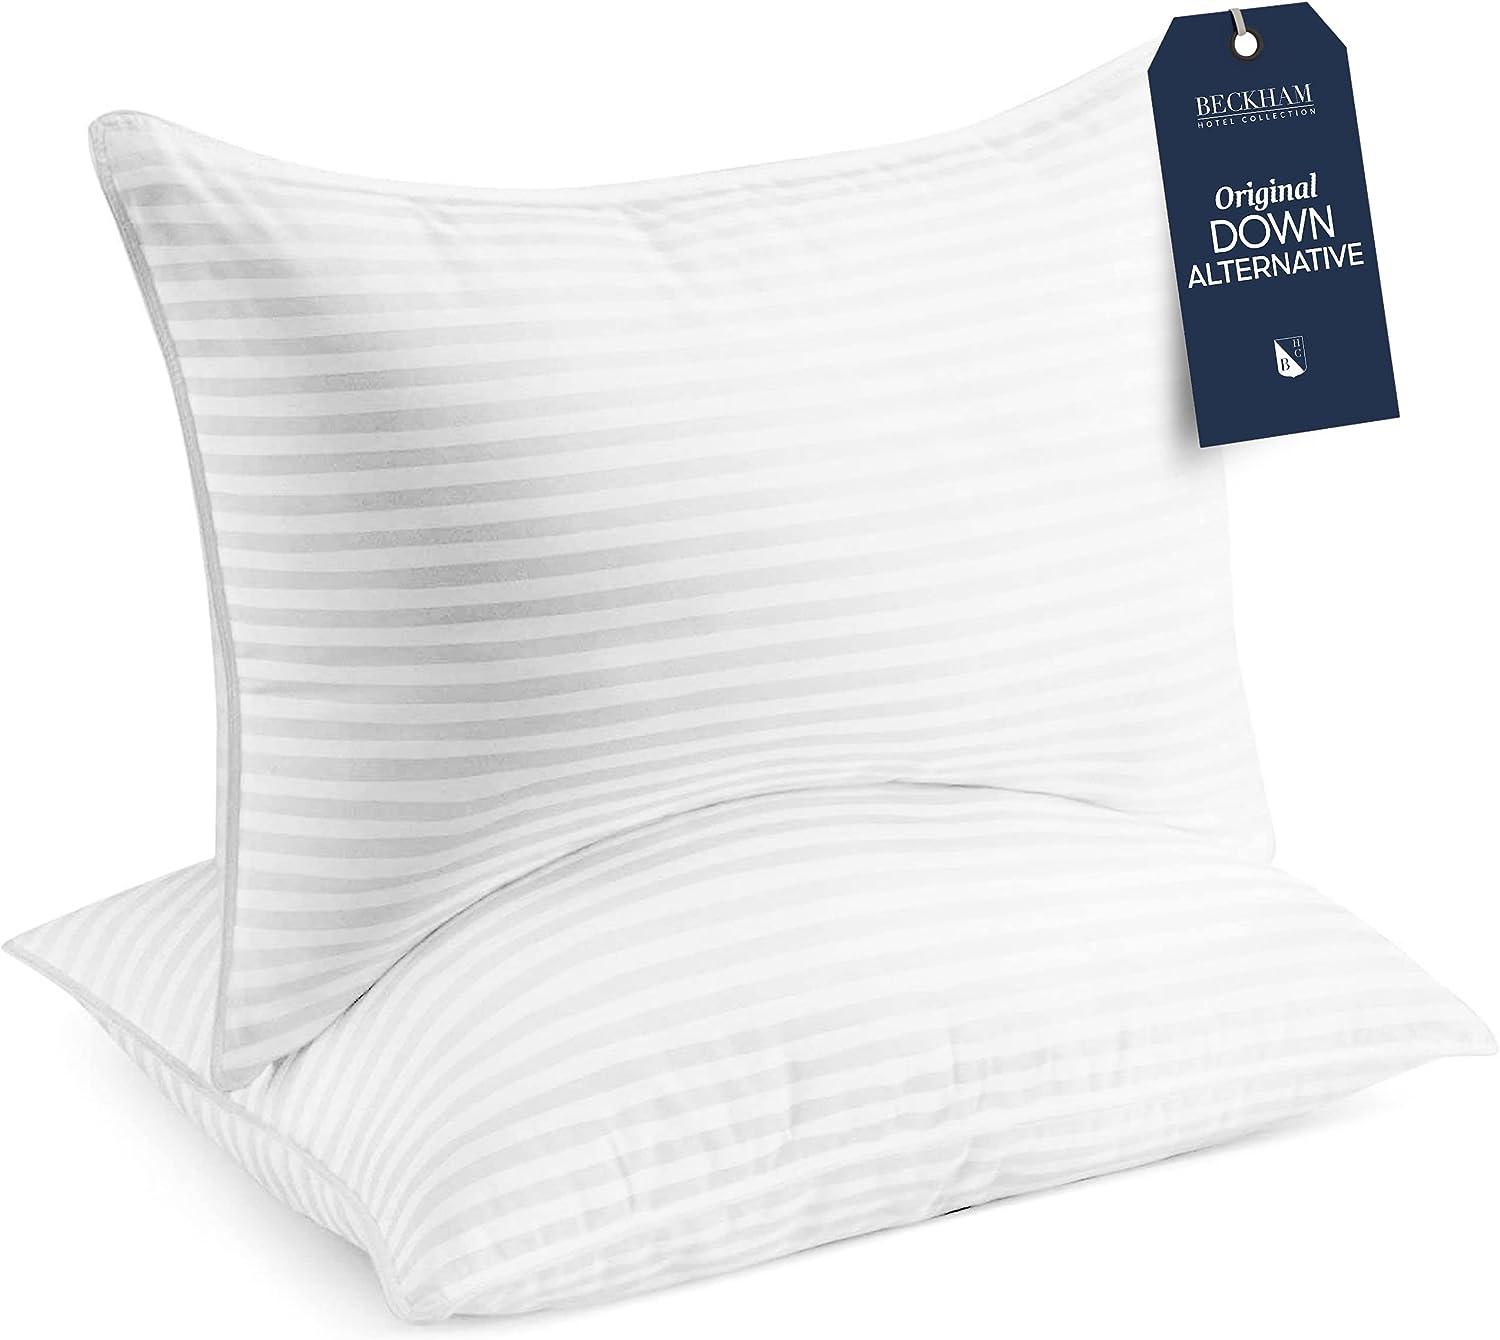 Beckham Hotel Collection Bed Pillow, King, Set of 2, Retail $80.00